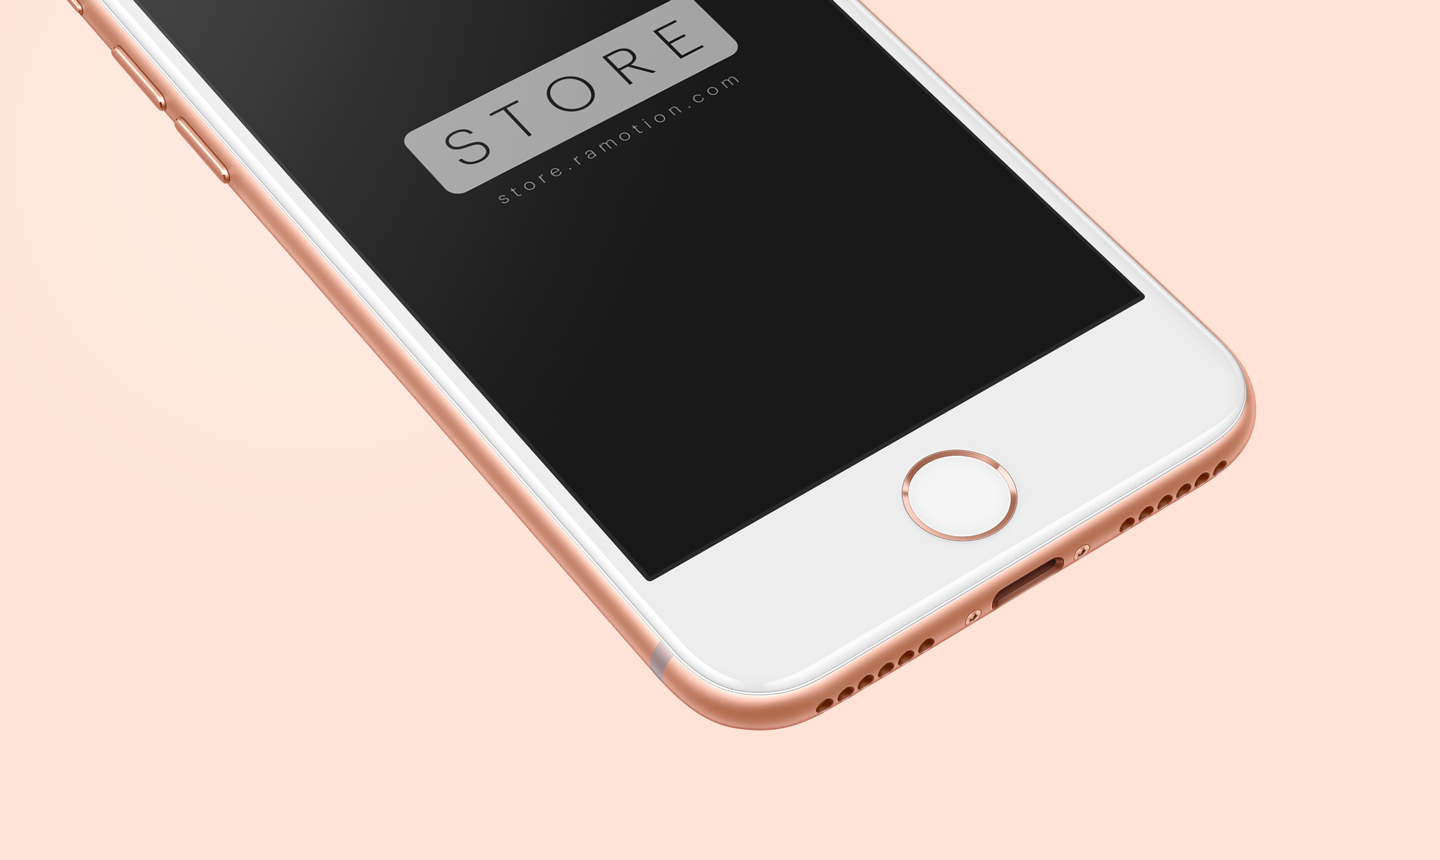 free phone mockup psd.jpg iphone 8 mockup   Dribbble gold by perspective